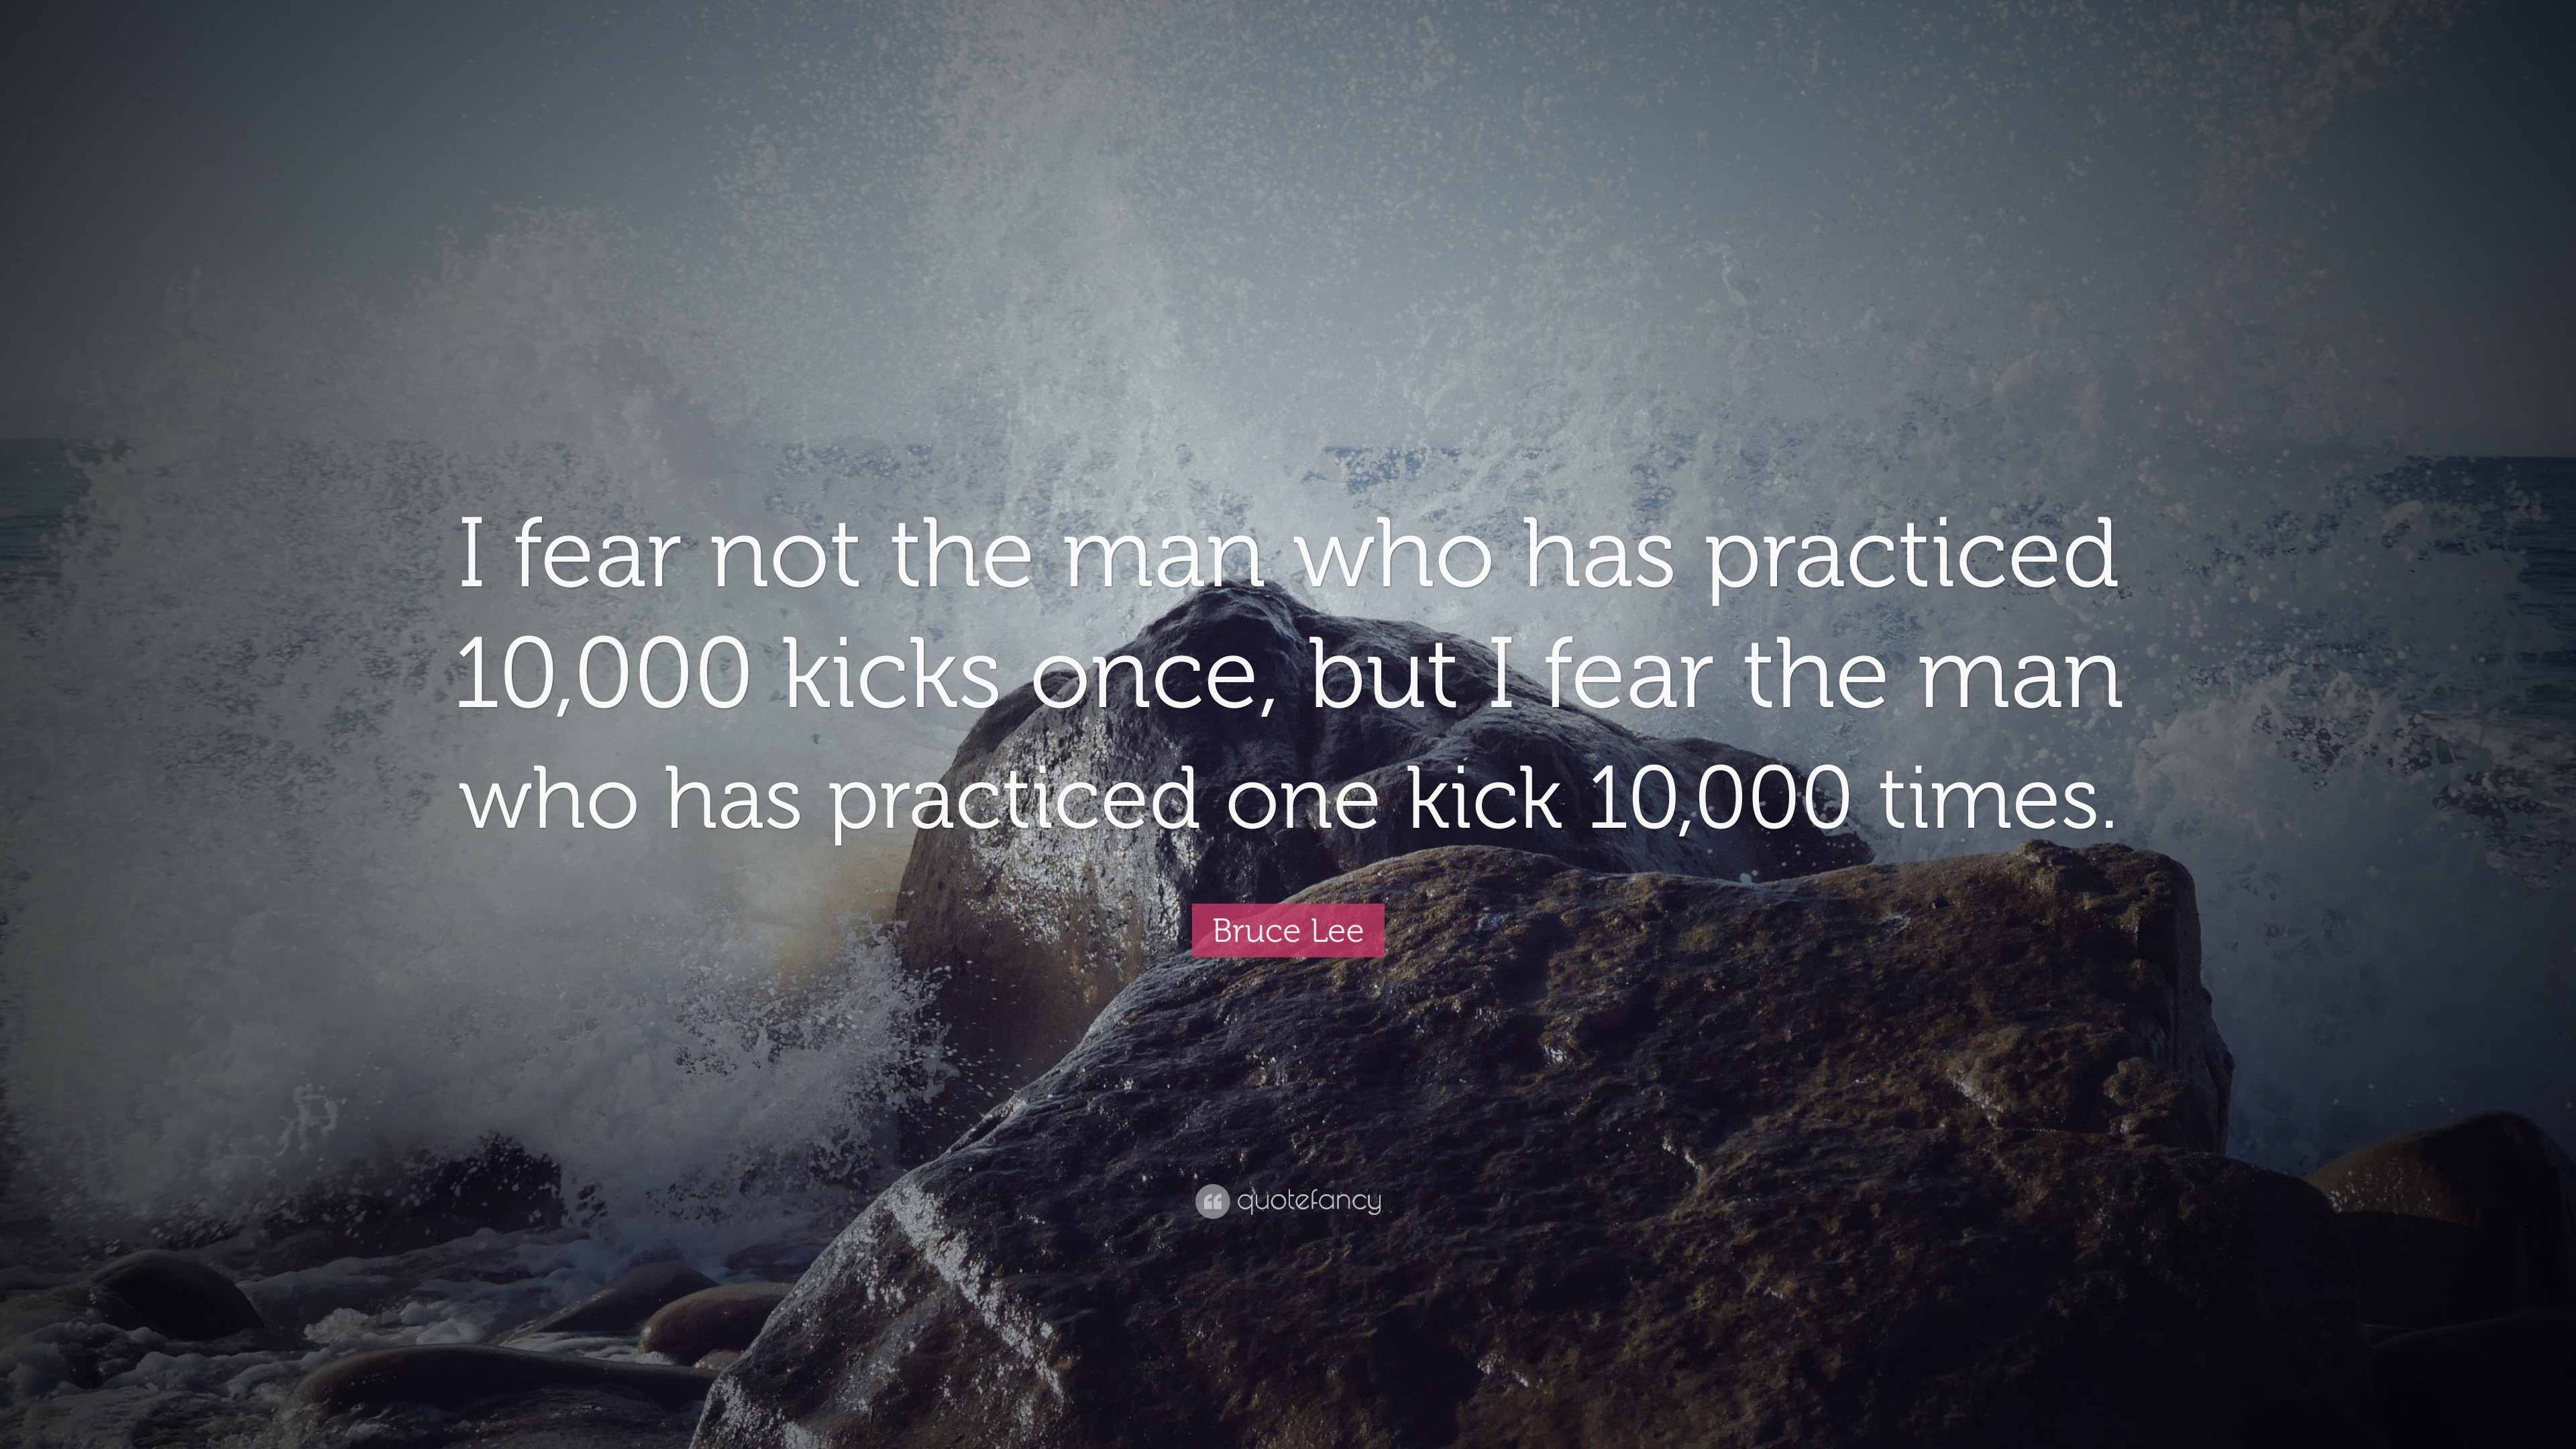 Bruce Lee Quote I Fear Not The Man Who Has Practiced Kicks Once But I Fear The Man Who